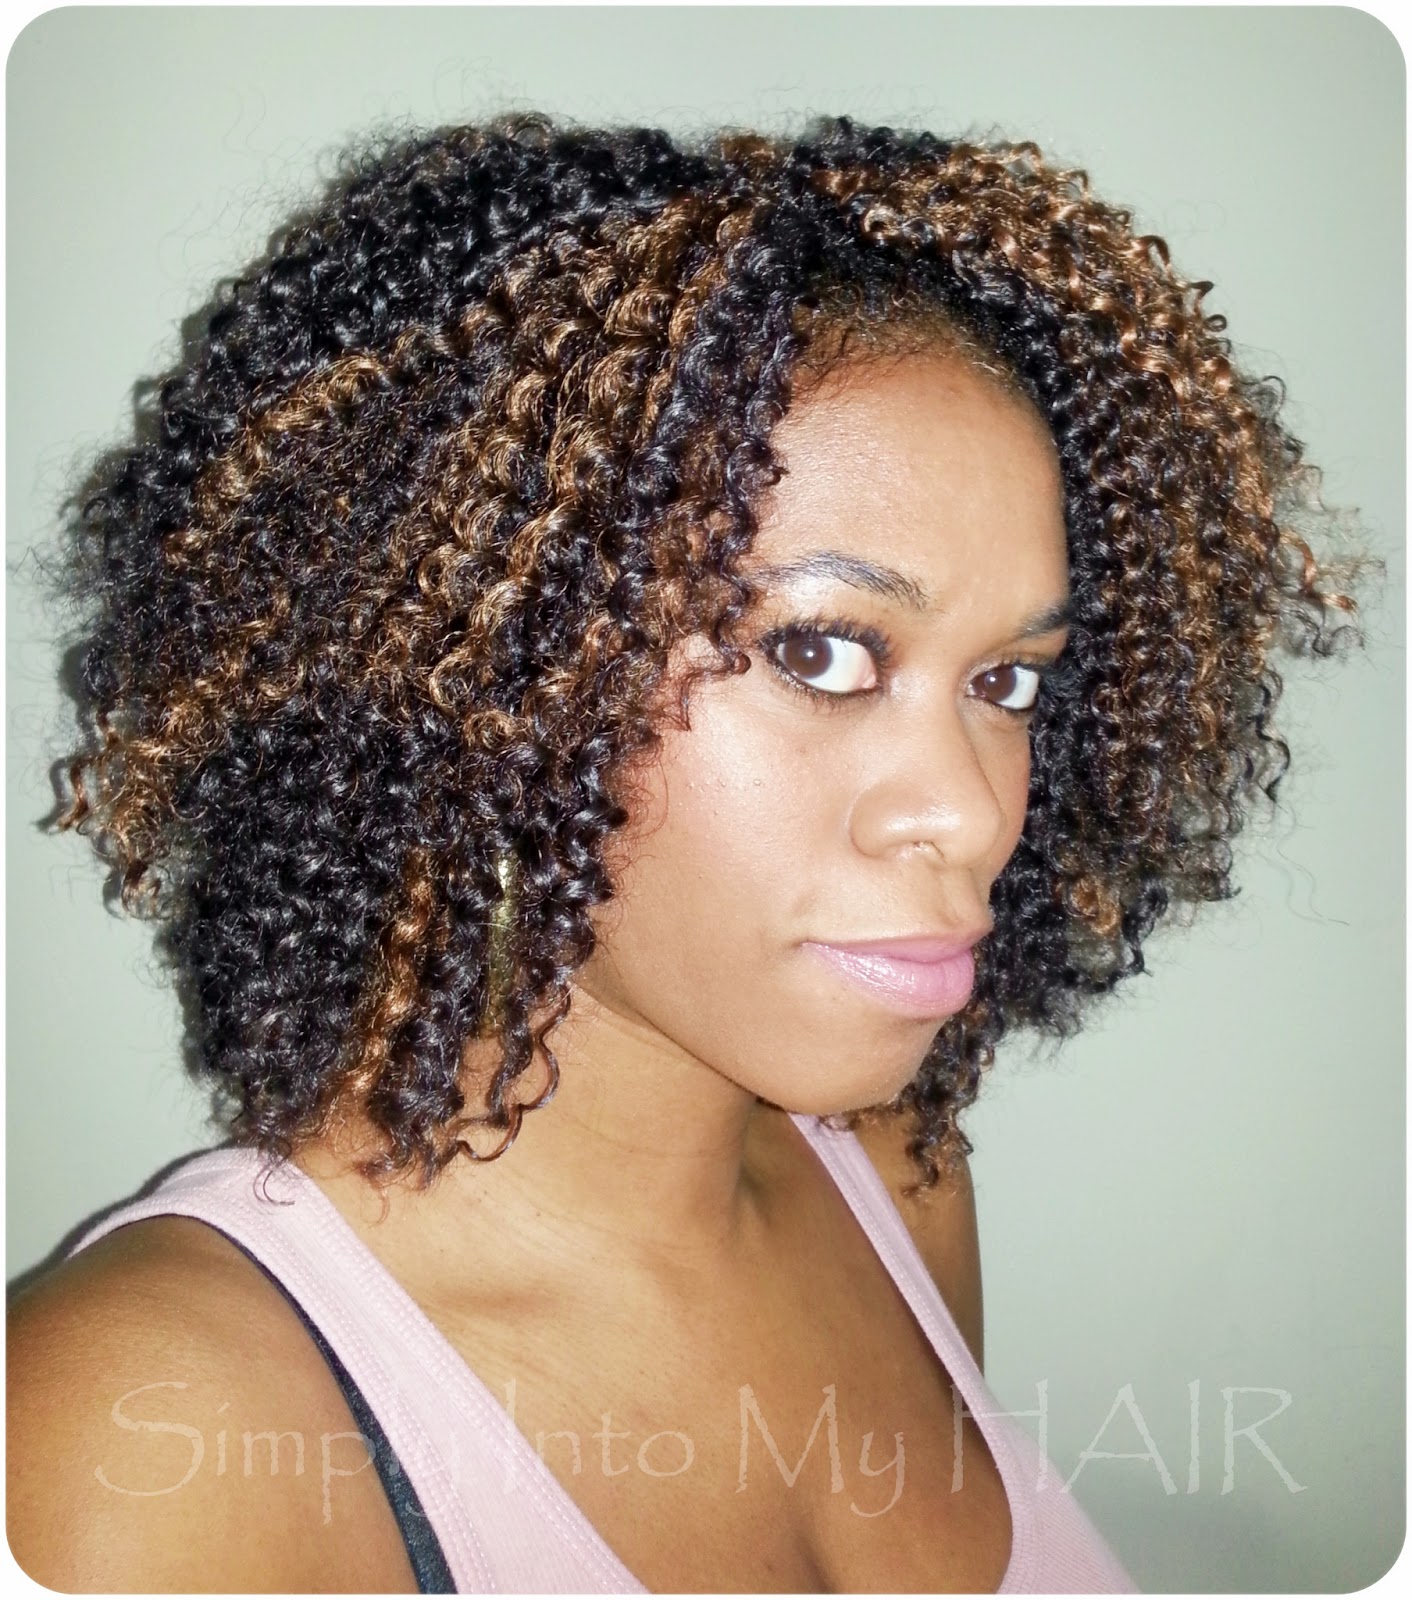 installed my 7th set of crochet braids earlier this month at 5  title=